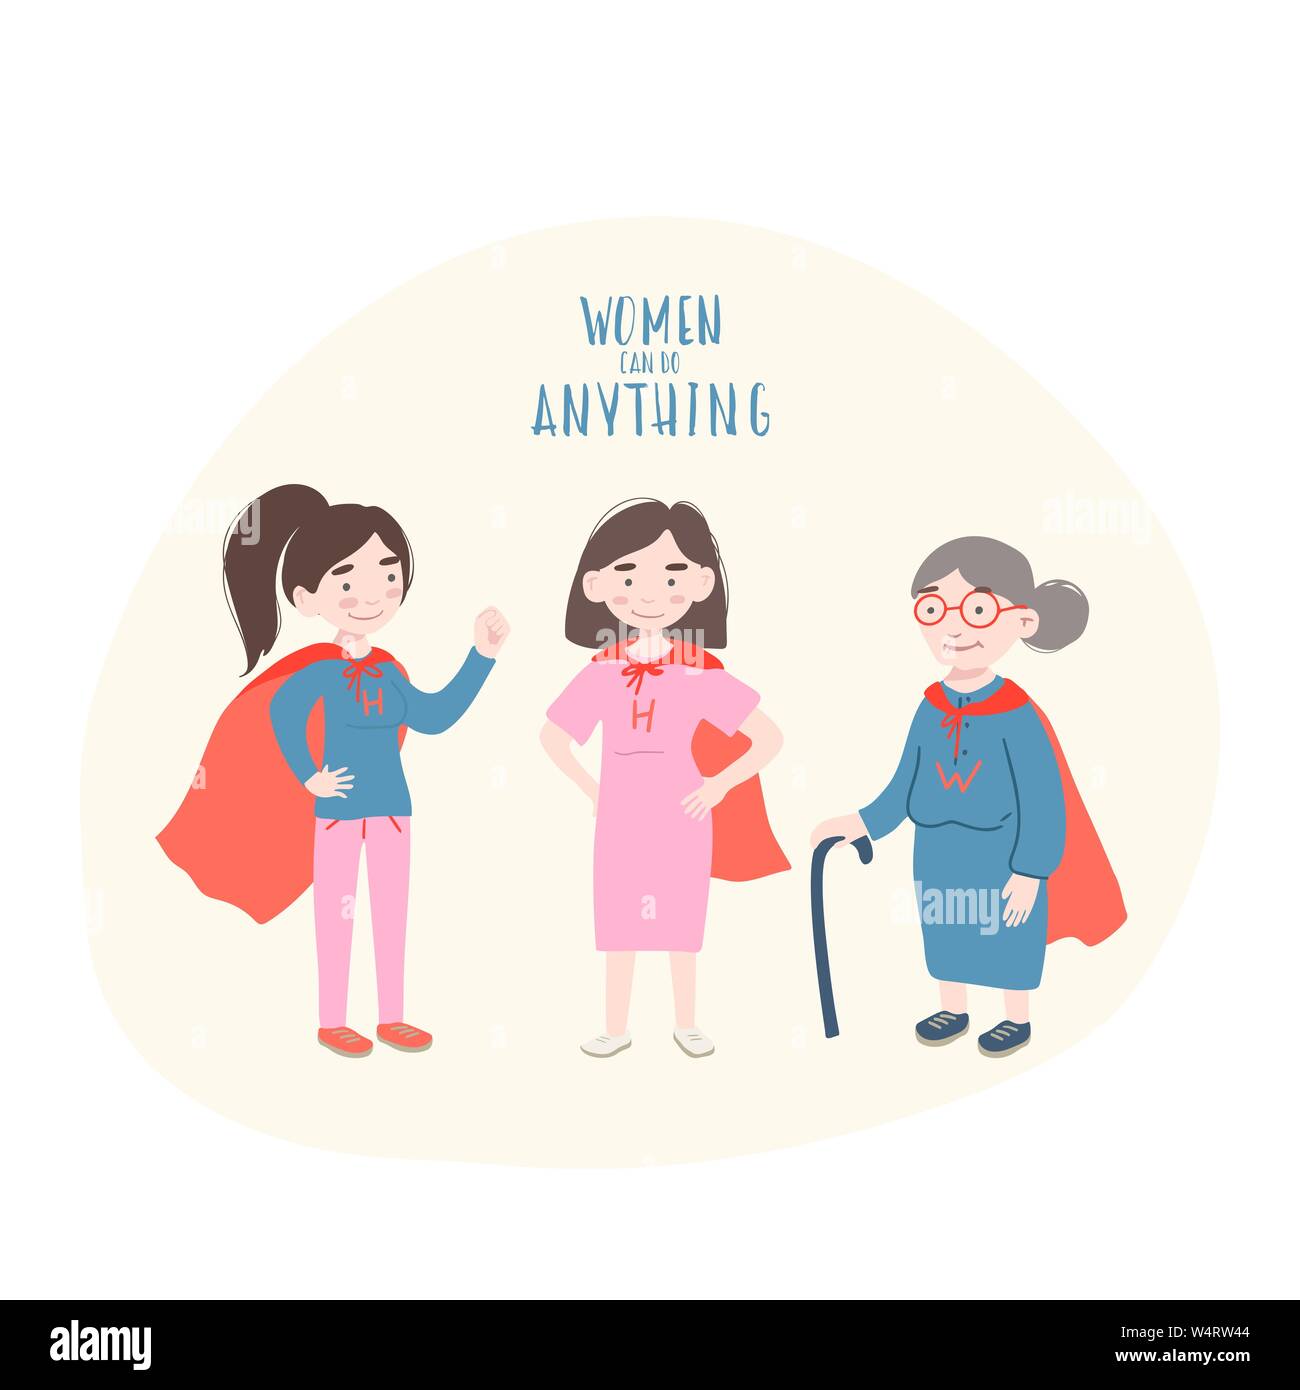 Superhero mother and daughter in superheroes costume. Superpowers women. Cartoon style vector feminism concept – women can do anything for party, invitations, web, print. Stock Vector